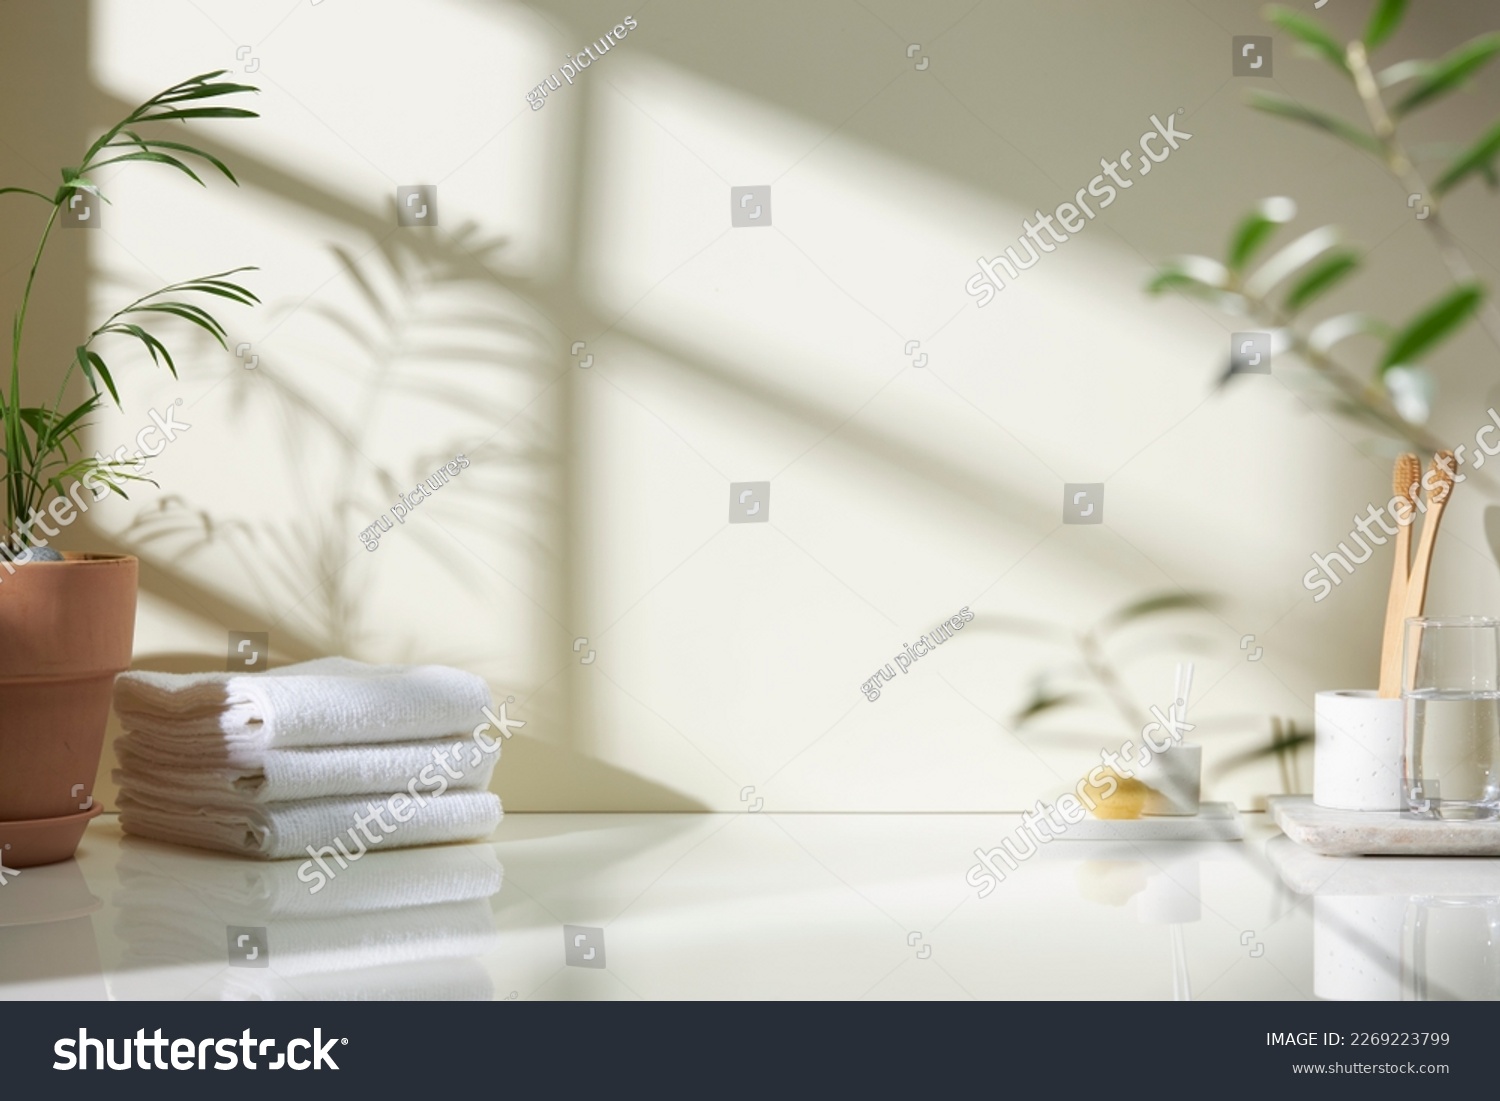 Various objects on a white tile background with warm sunlight shining through
 #2269223799